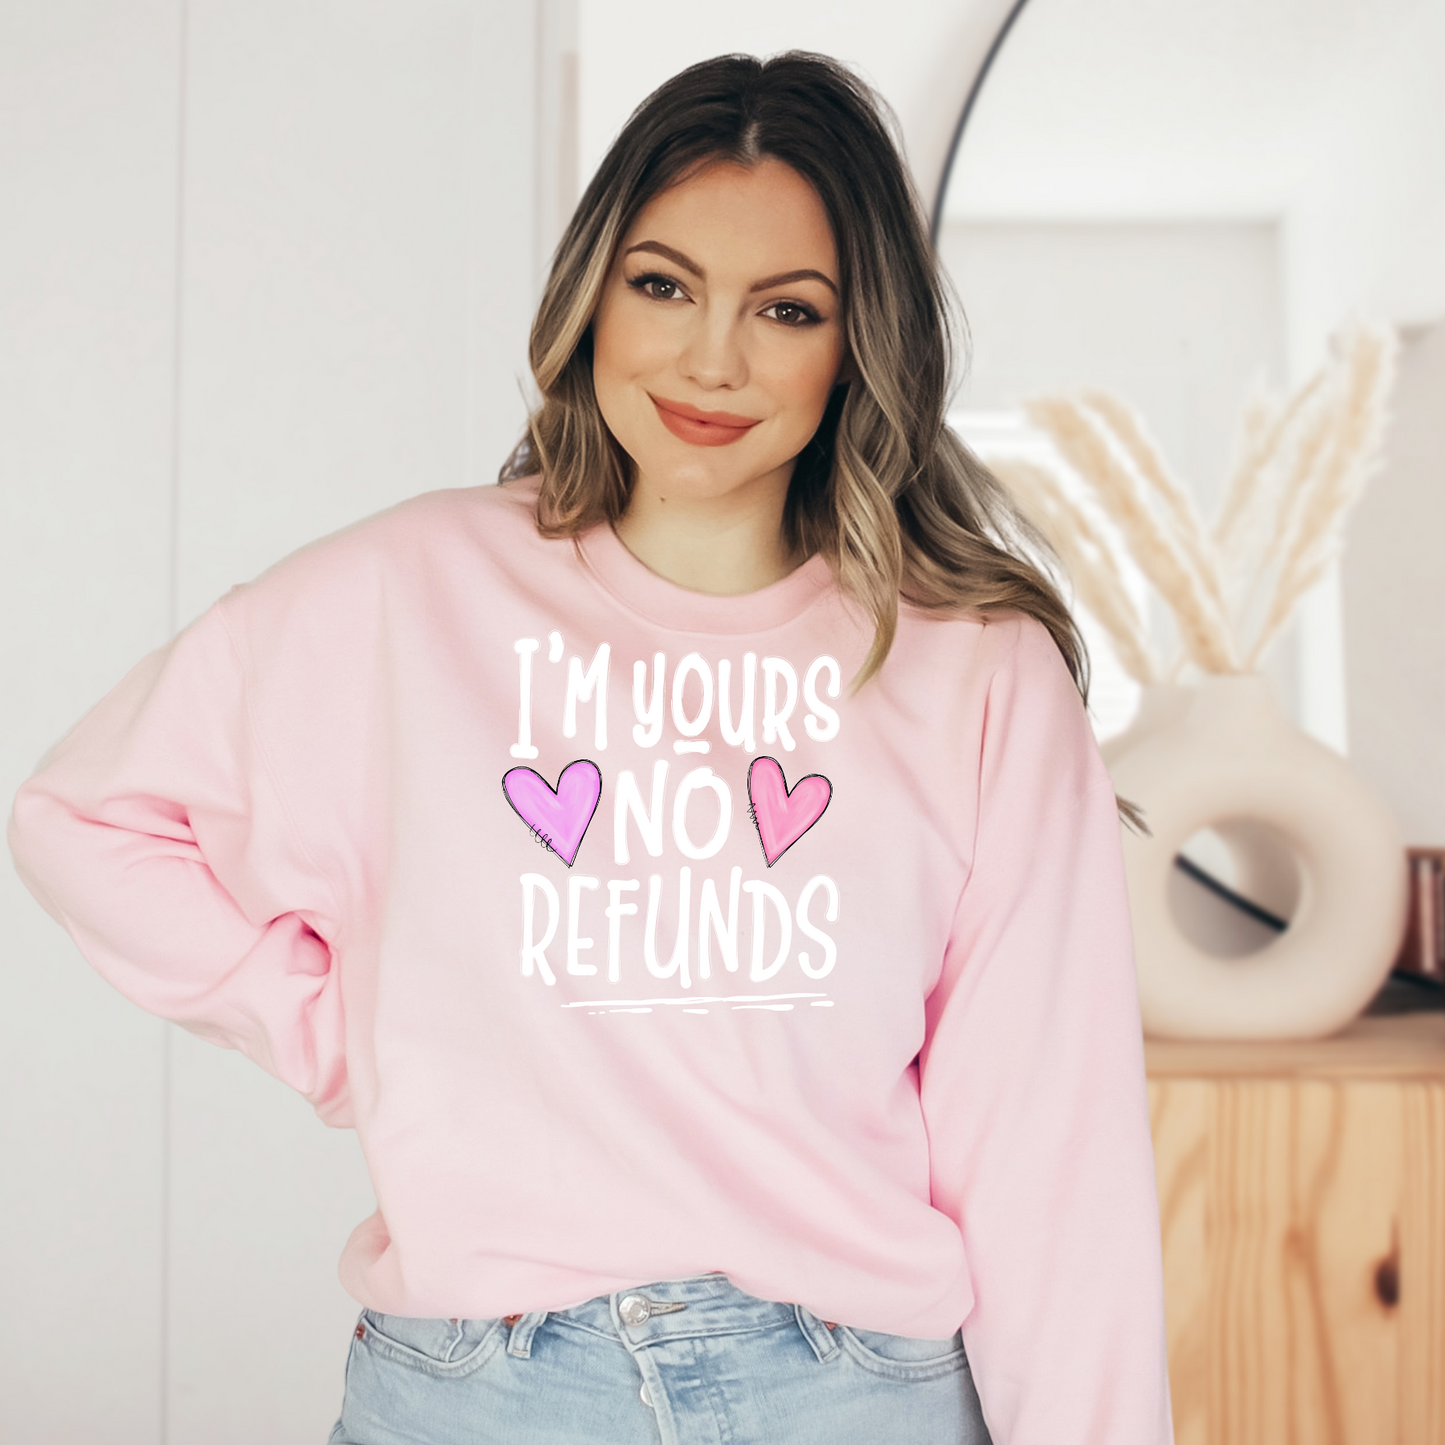 No Refunds - Adult - DTF